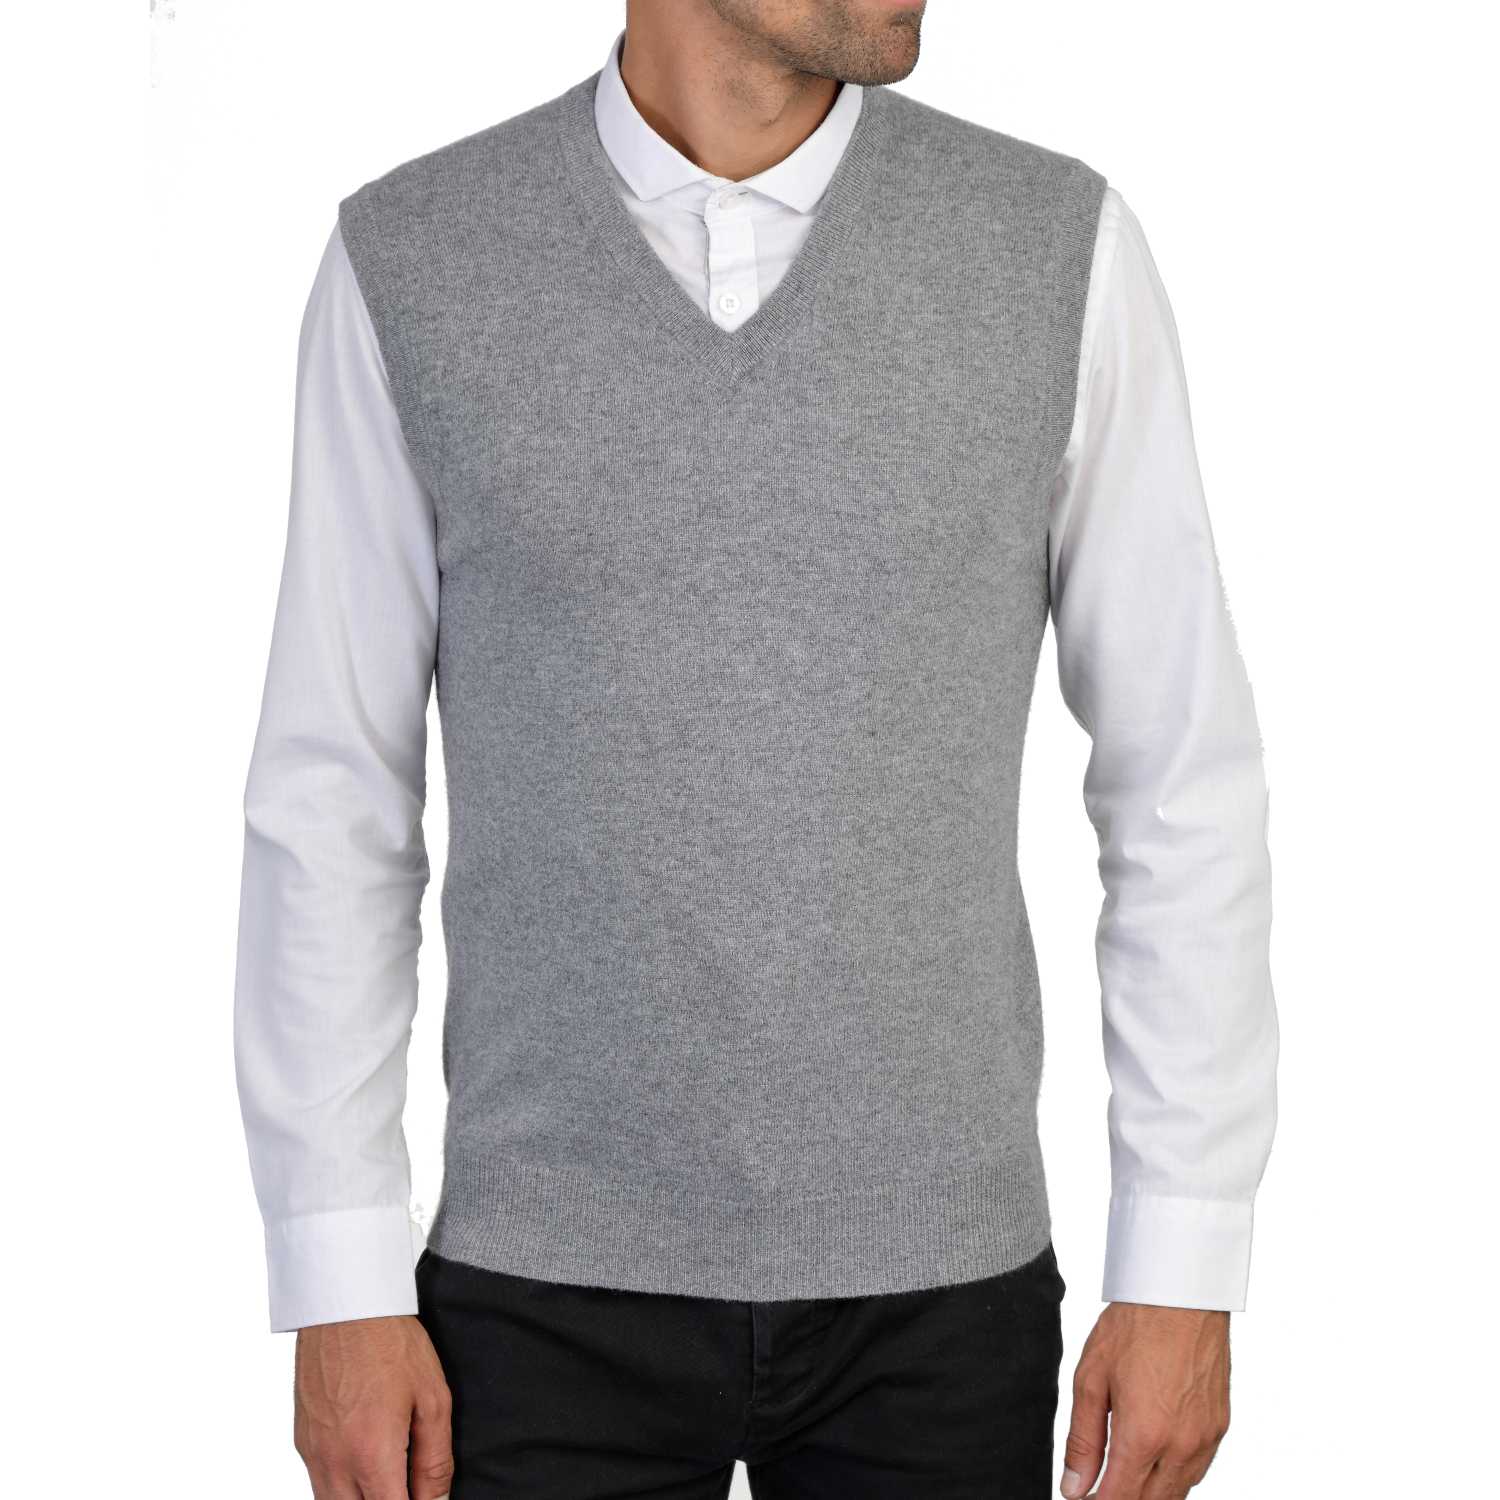 Mens Grey Cashmere Sleeveless Vest Sweater | Front | Shop at The Cashmere Choice | London